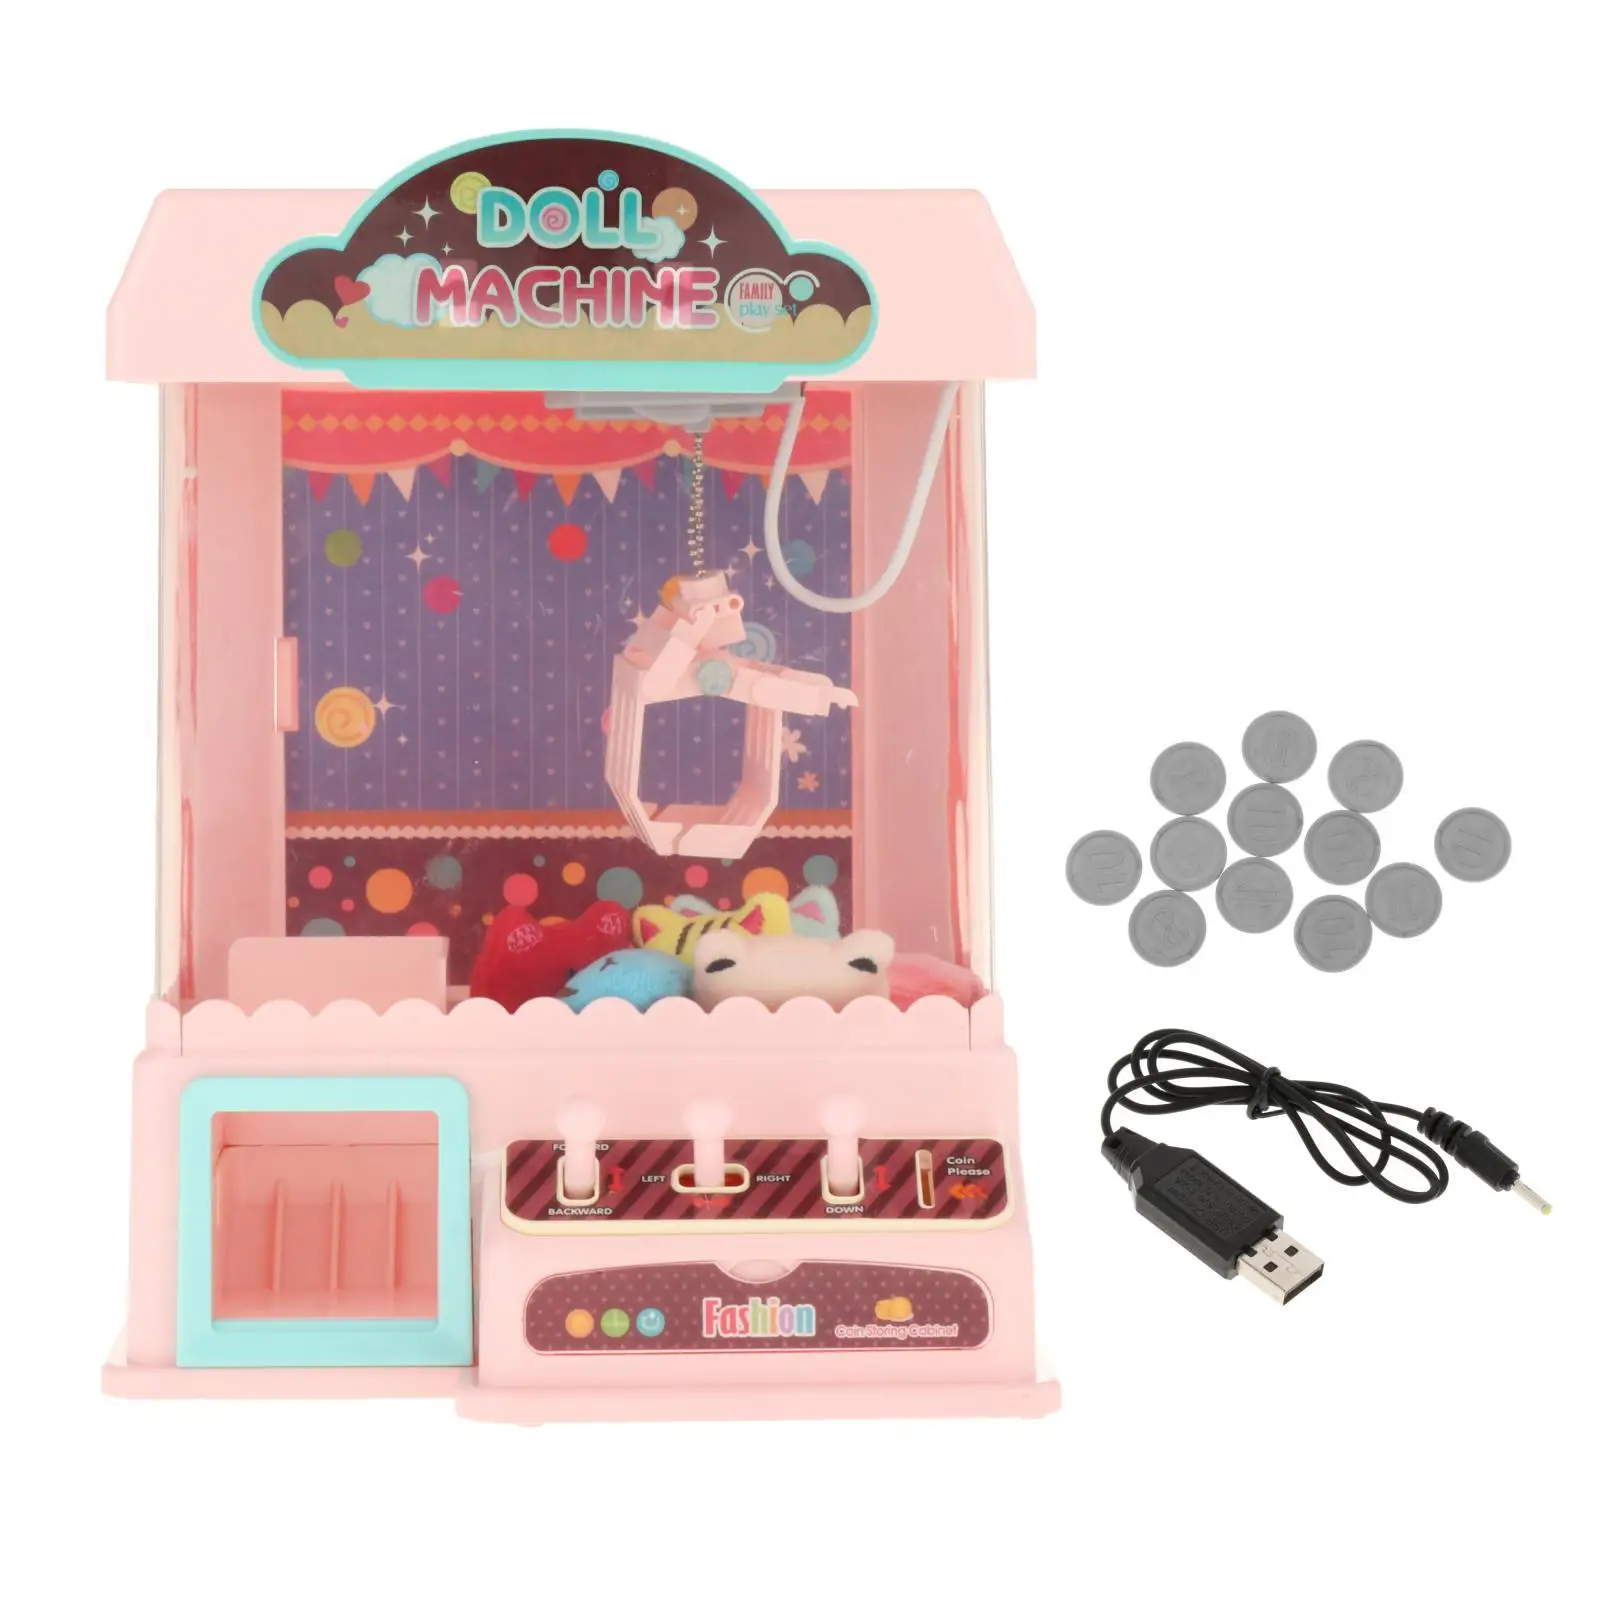 Rechargeable DIY Electric Claw Machine with Lights & Sounds Girl Grab Doll Clip Arcade Machine for Children Birthday Gifts